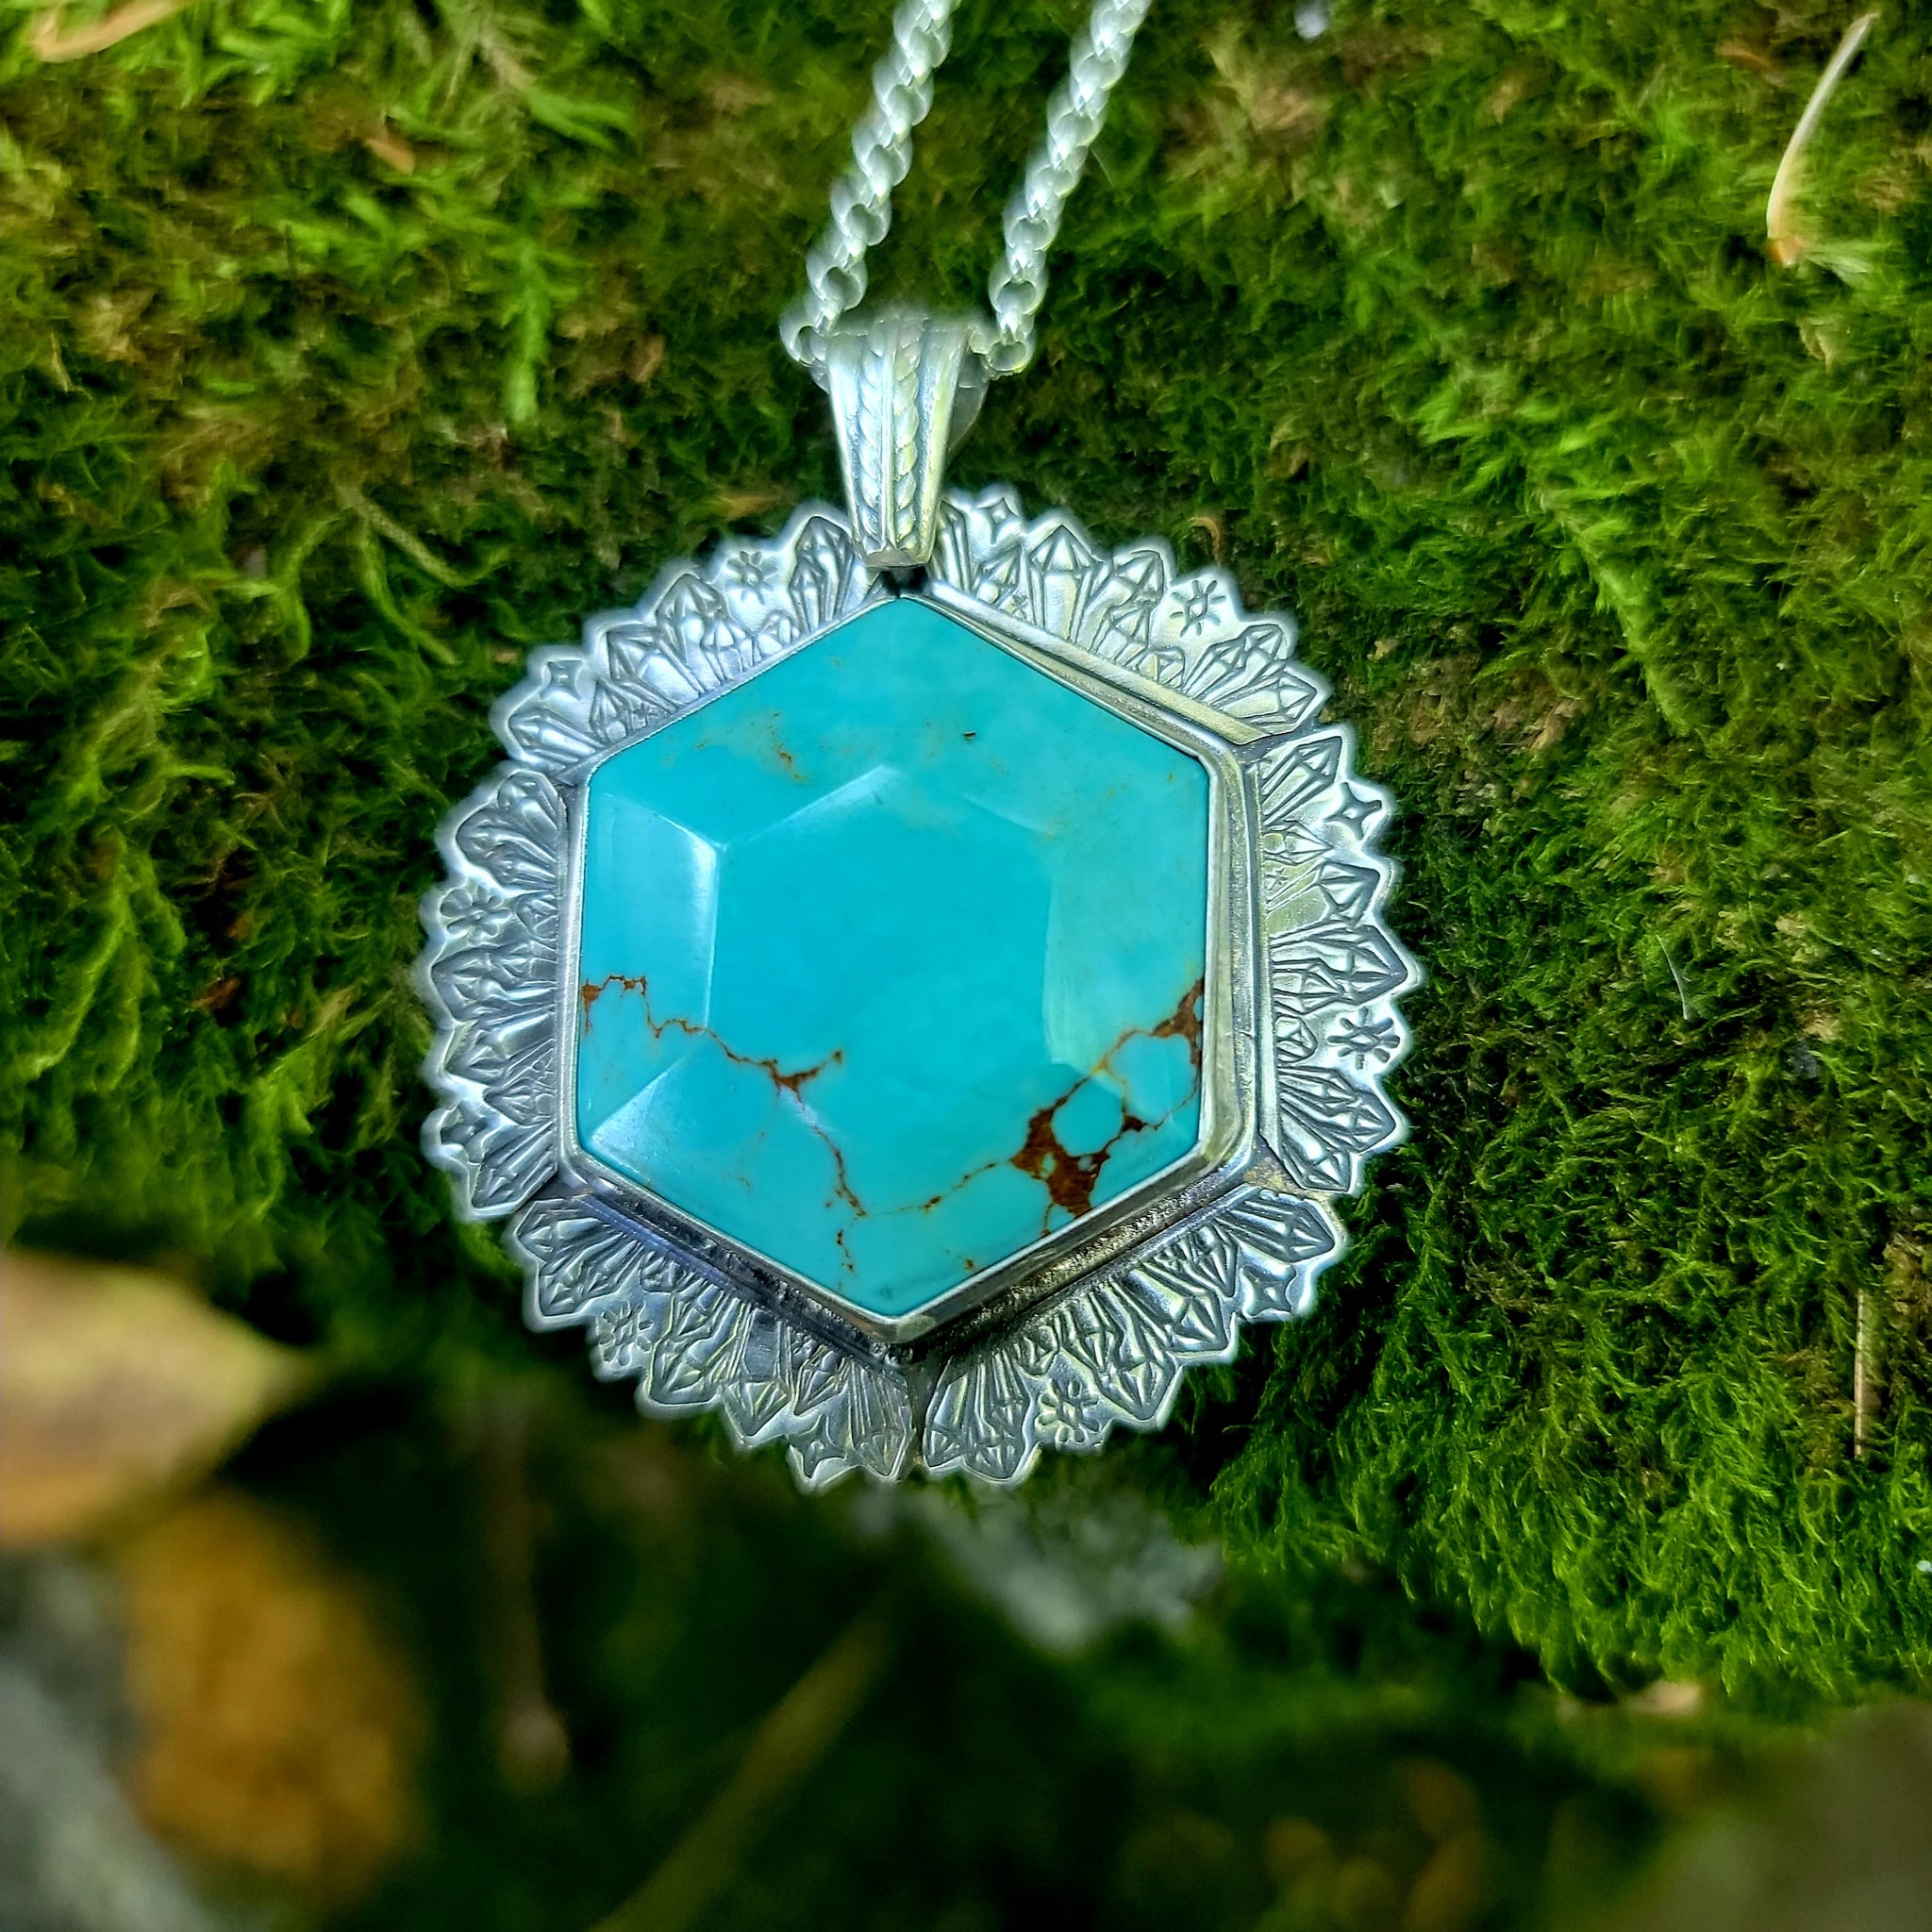 Crystal Hex Pendant with Turquoise in Sterling Silver